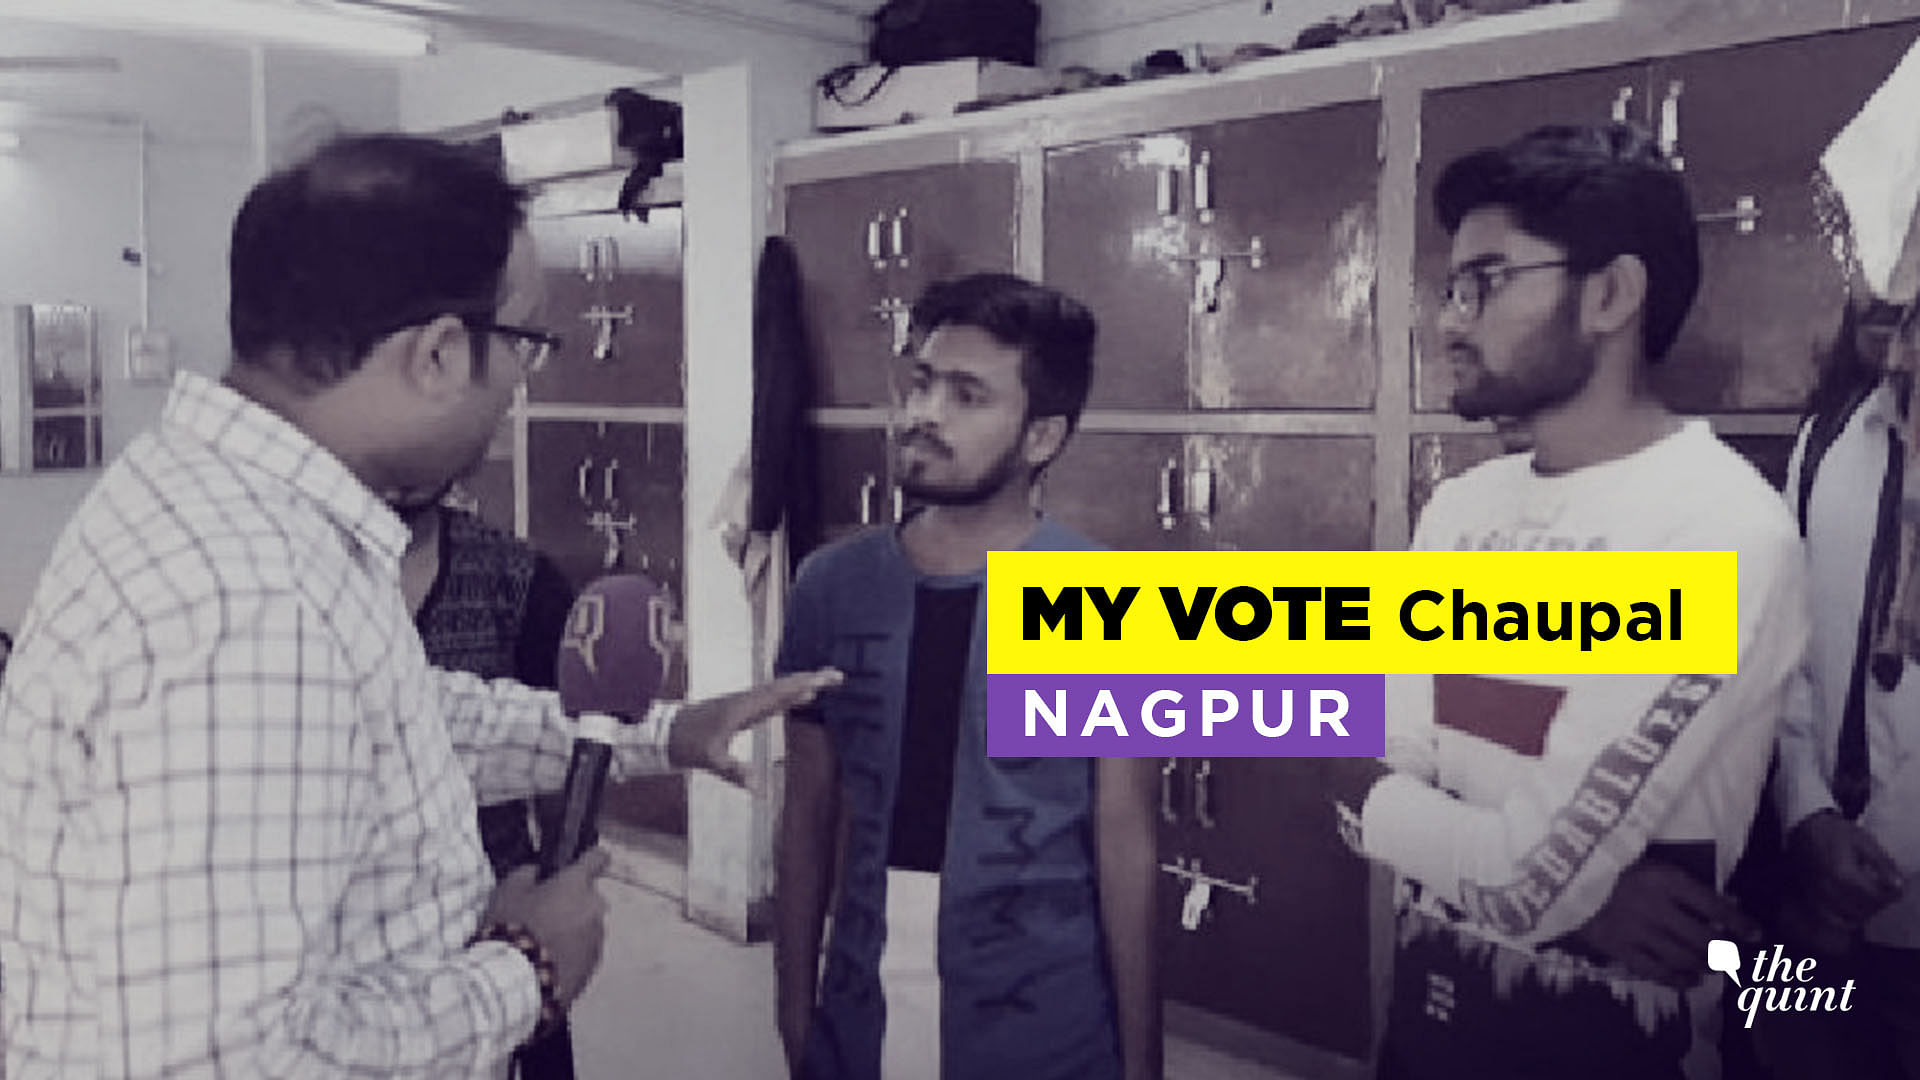 <b>The Quint</b> spoke to Dalit youth in Nagpur to try and understand their perspective on the general elections.